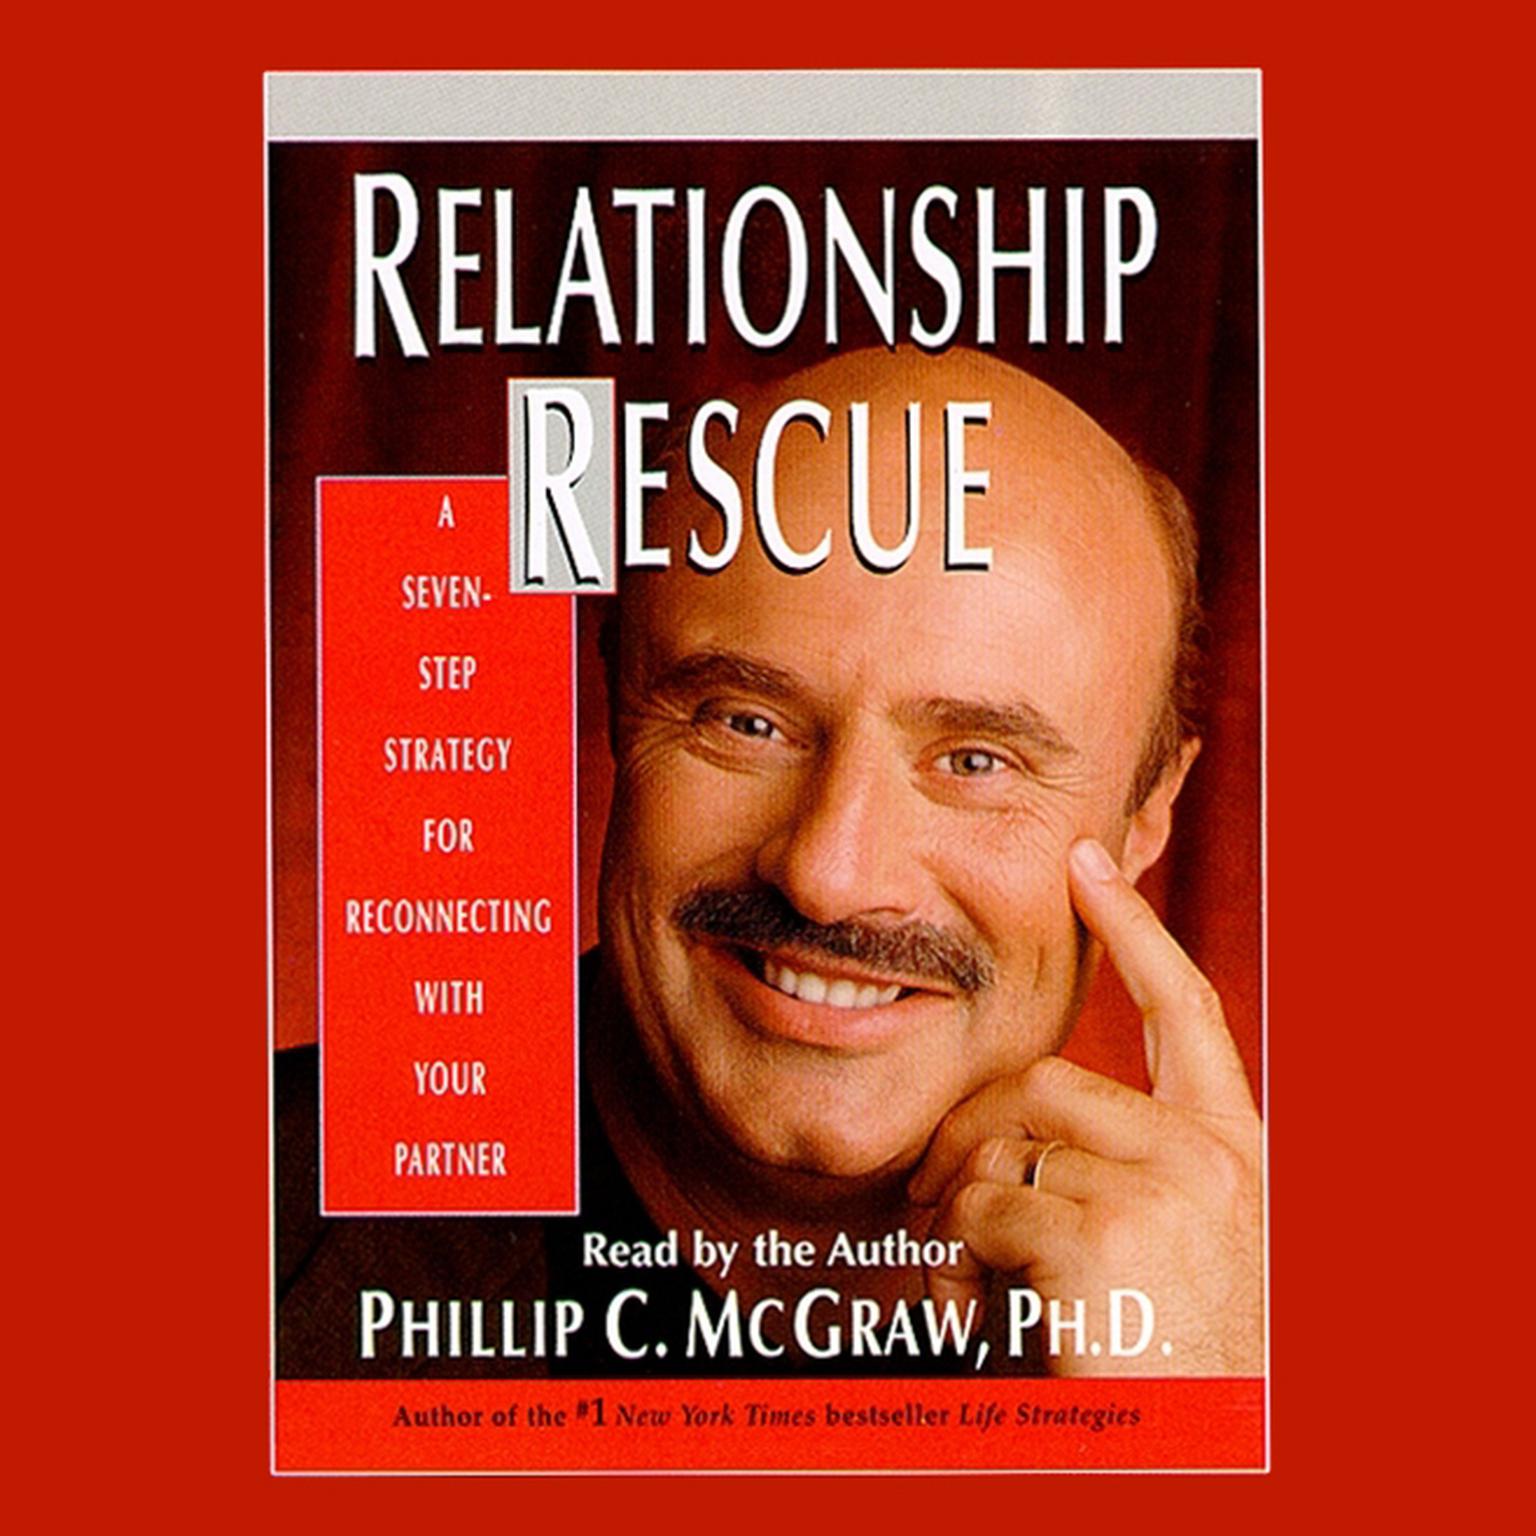 Relationship Rescue (Abridged): A Seven Step Strategy For Reconnecting With Your Partner Audiobook, by Phil McGraw